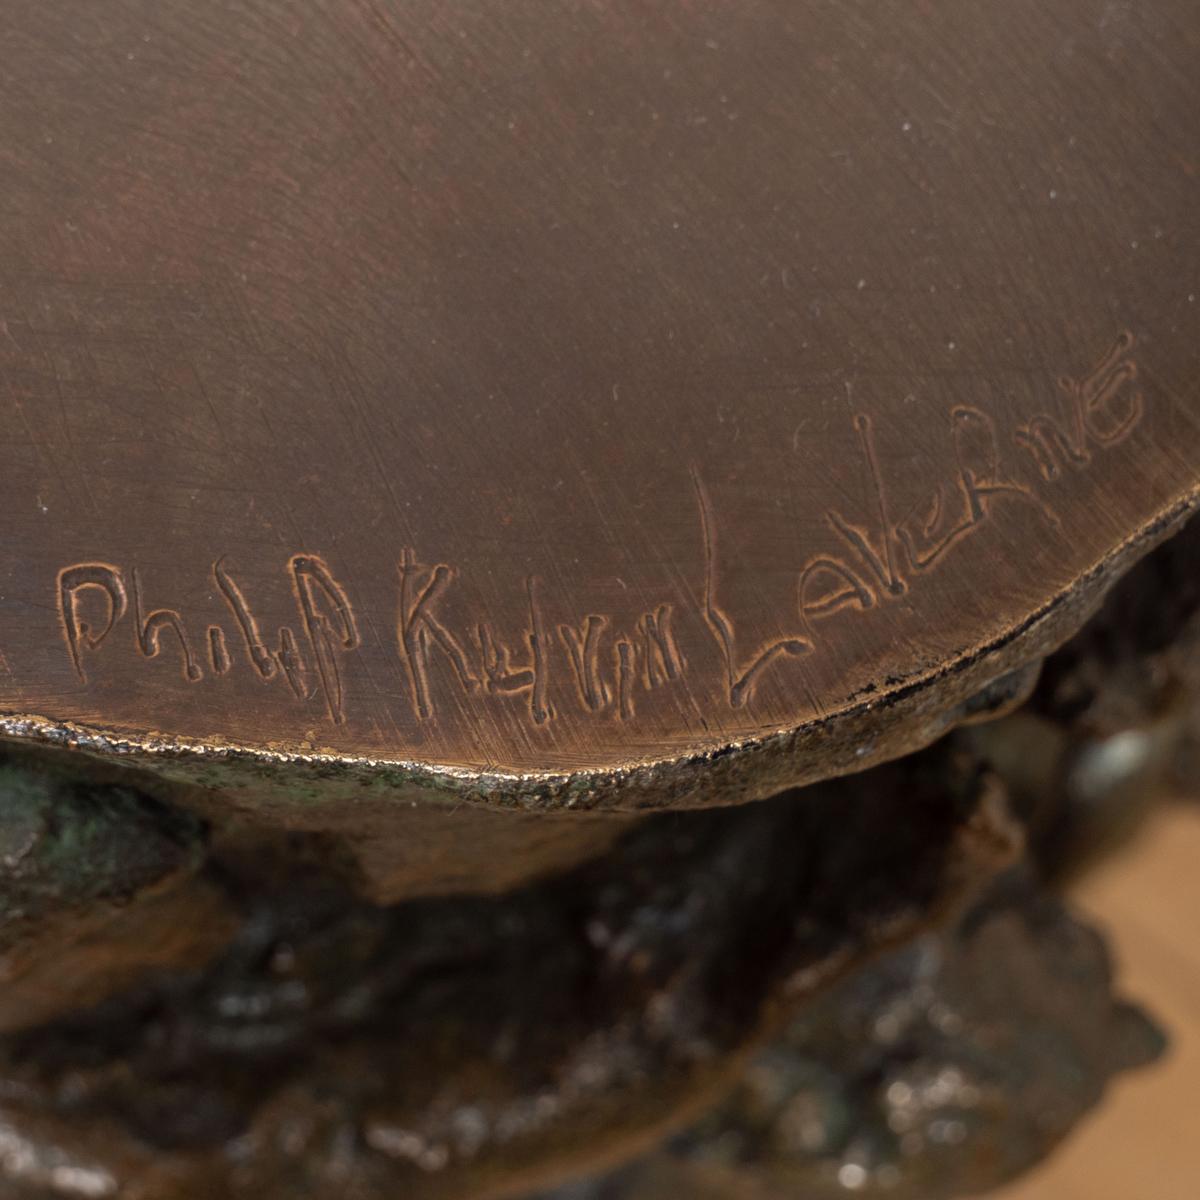 Bronze figural side table by Philip and Kelvin LaVerne.